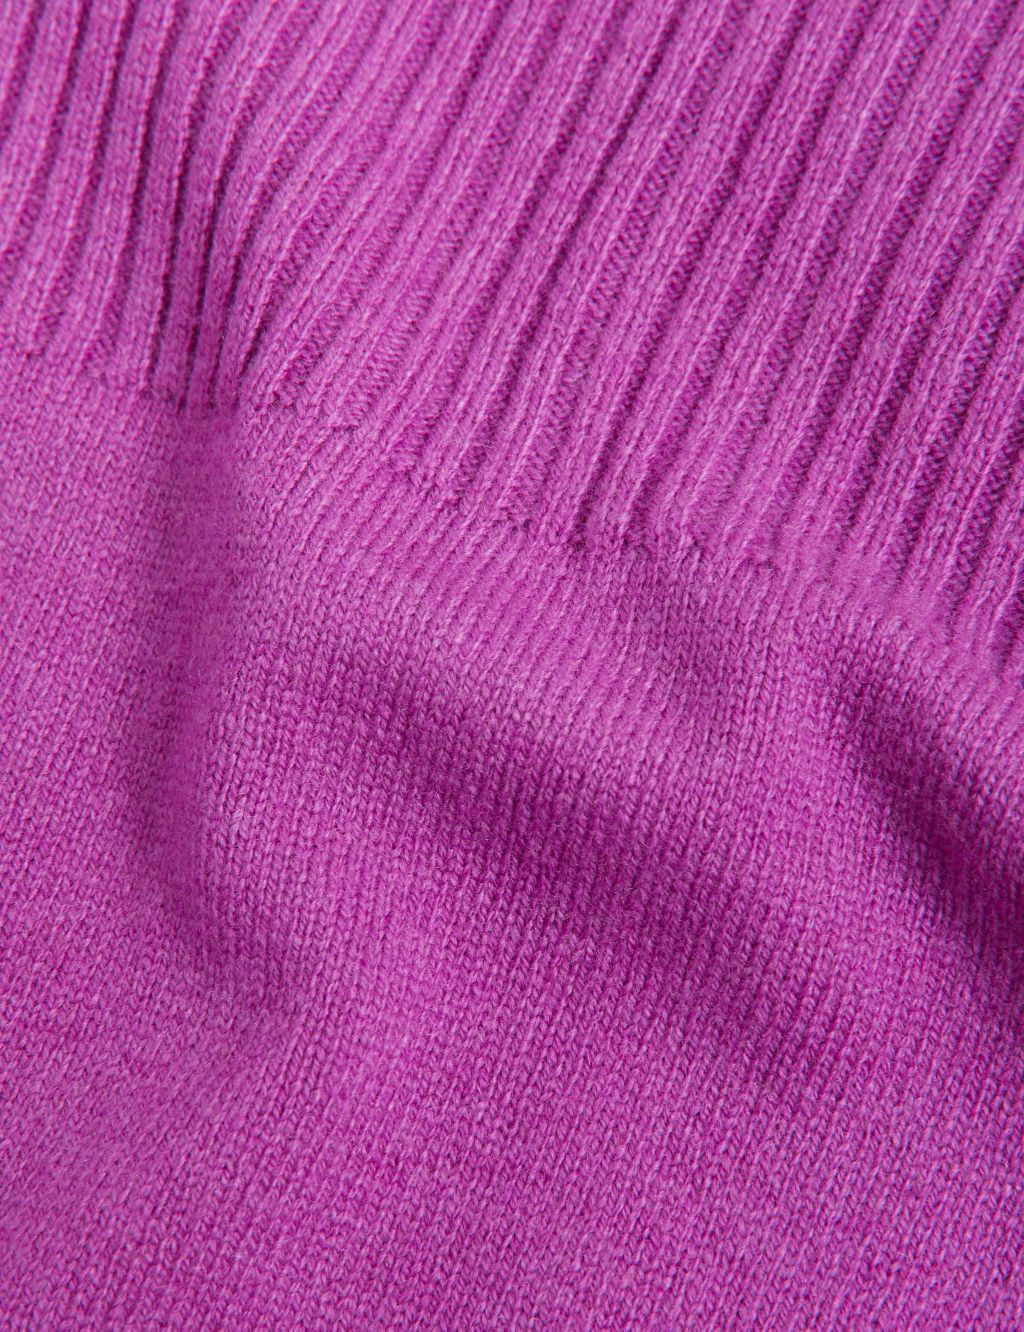 Notch Neck Jumper with Wool image 5